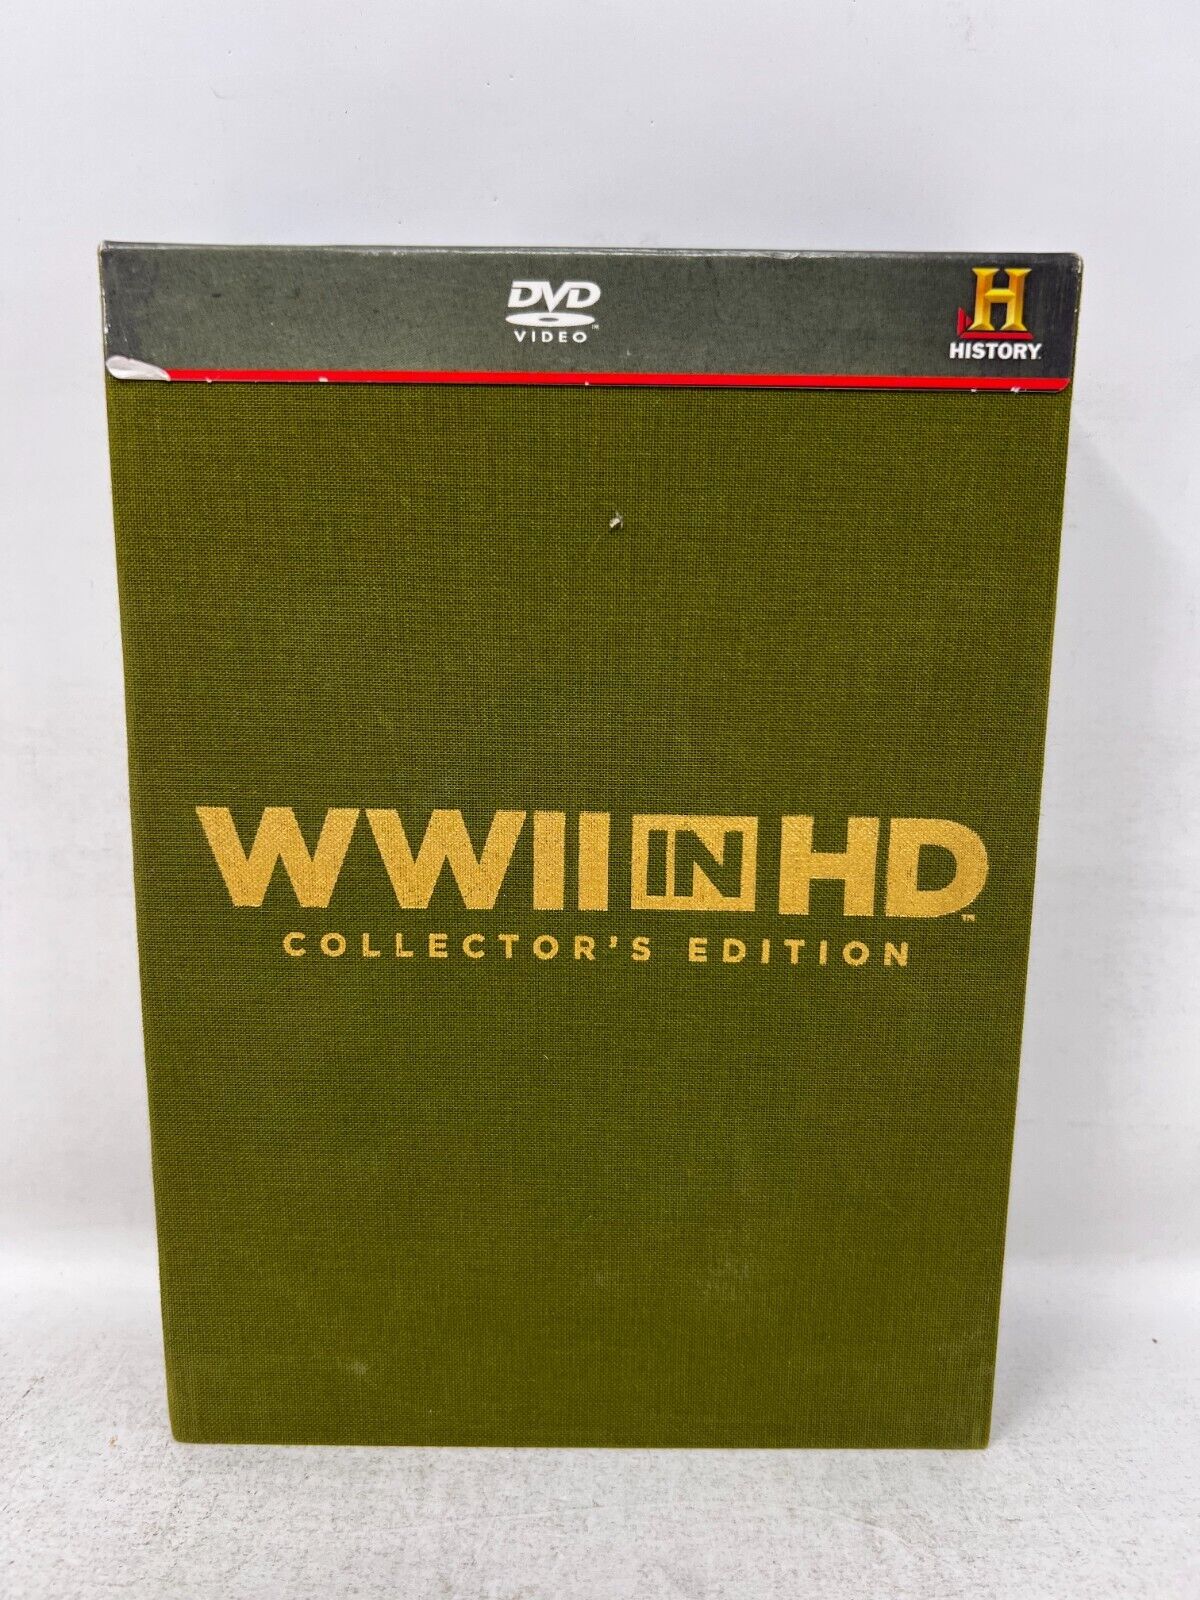 WWII In HD (DVD) Collector's Edition TV Series Boxset War Good Condition!!!